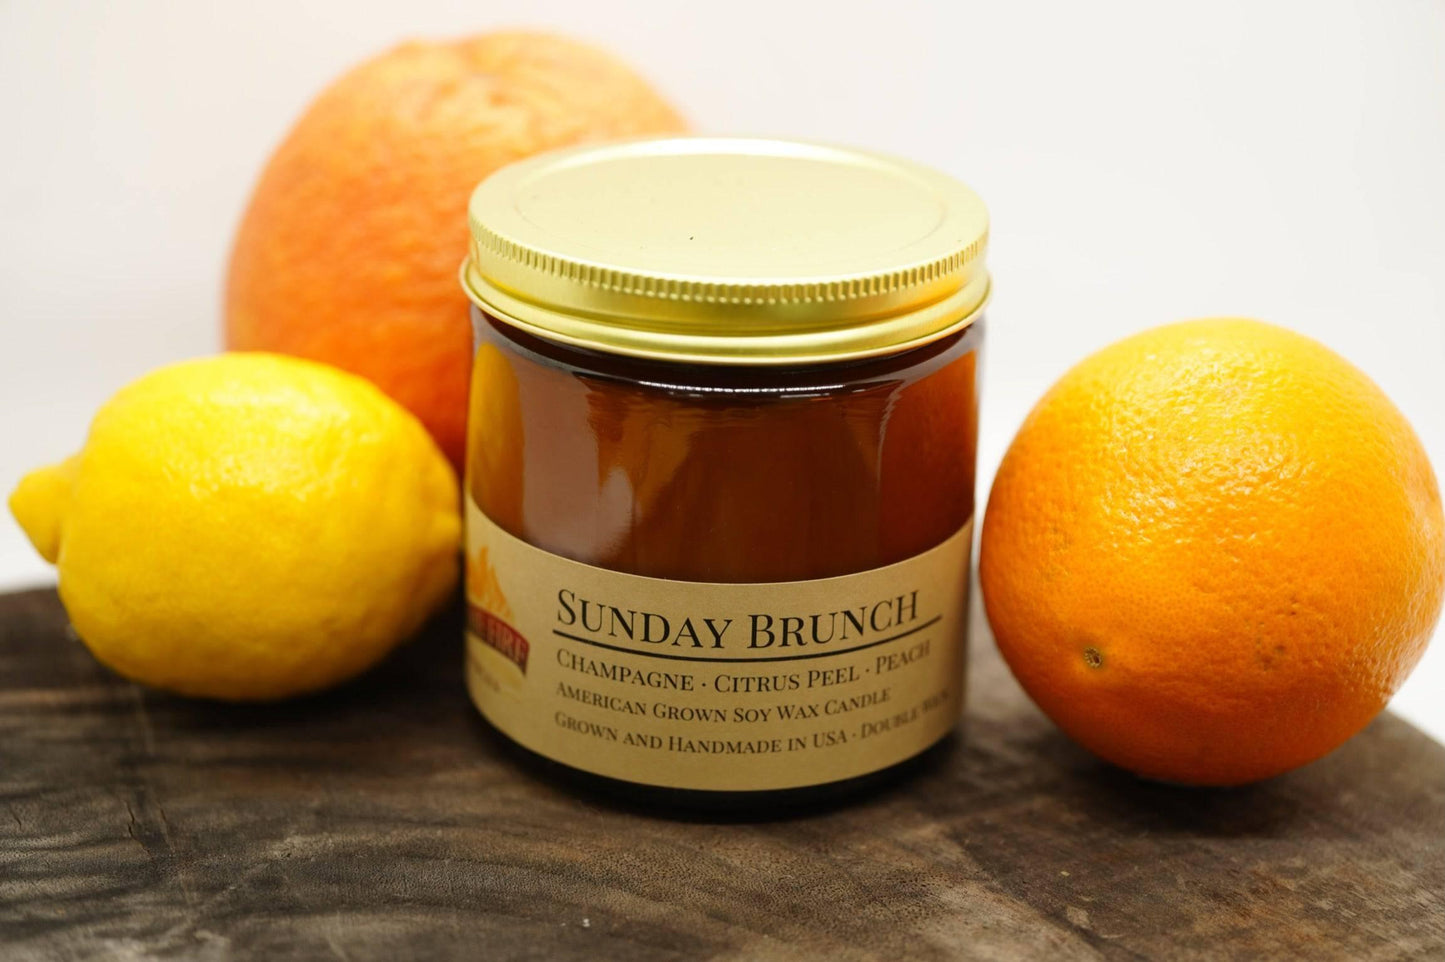 sunday brunch soy wax candle | 16 oz double wick amber apothecary jar by prairie fire tallow, candles, and lavender